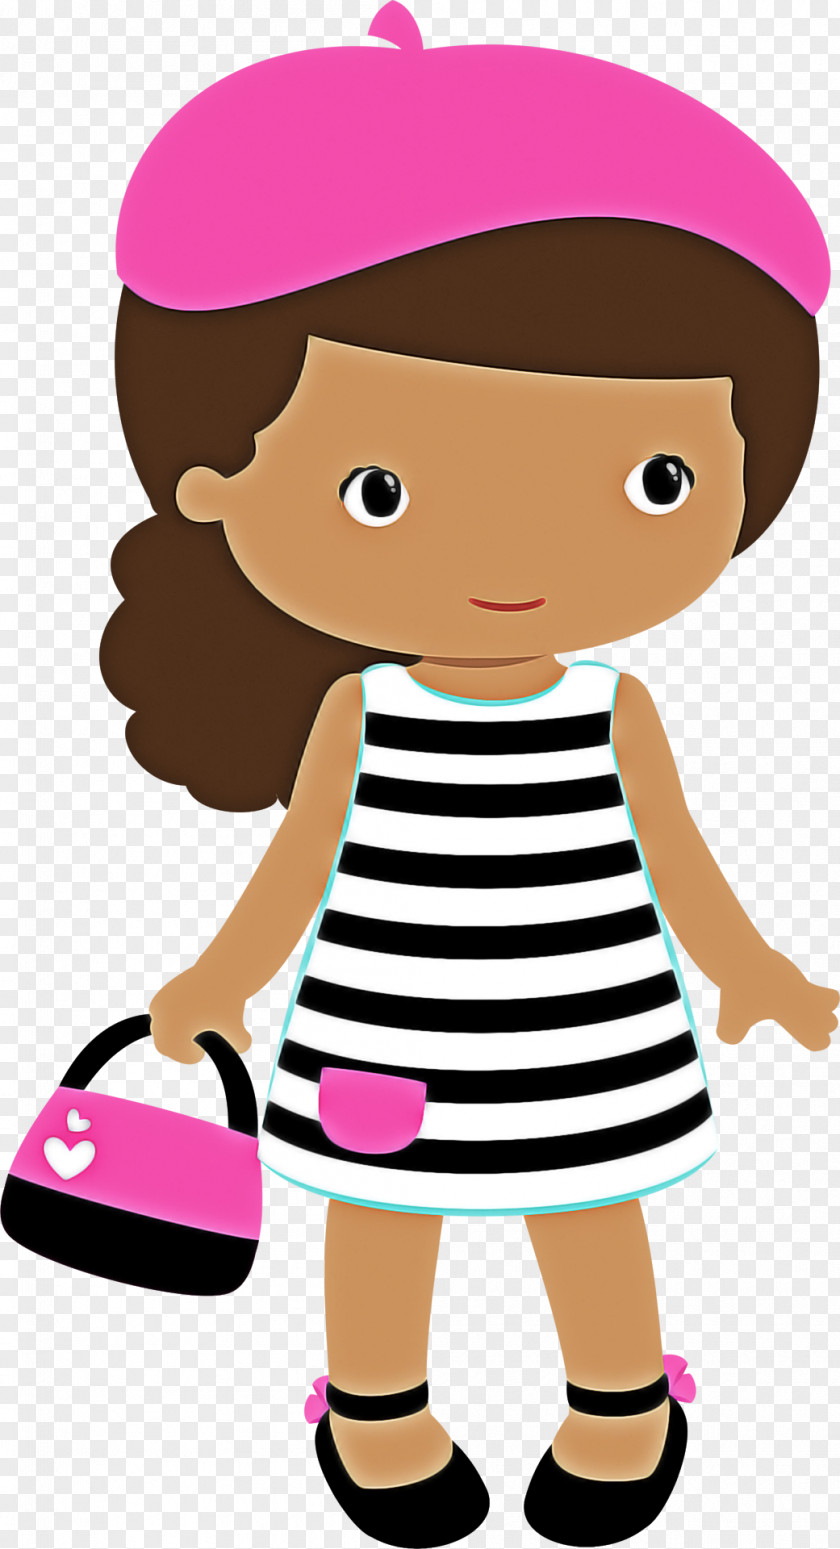 Style Toy Cartoon Clip Art Pink Doll Child PNG